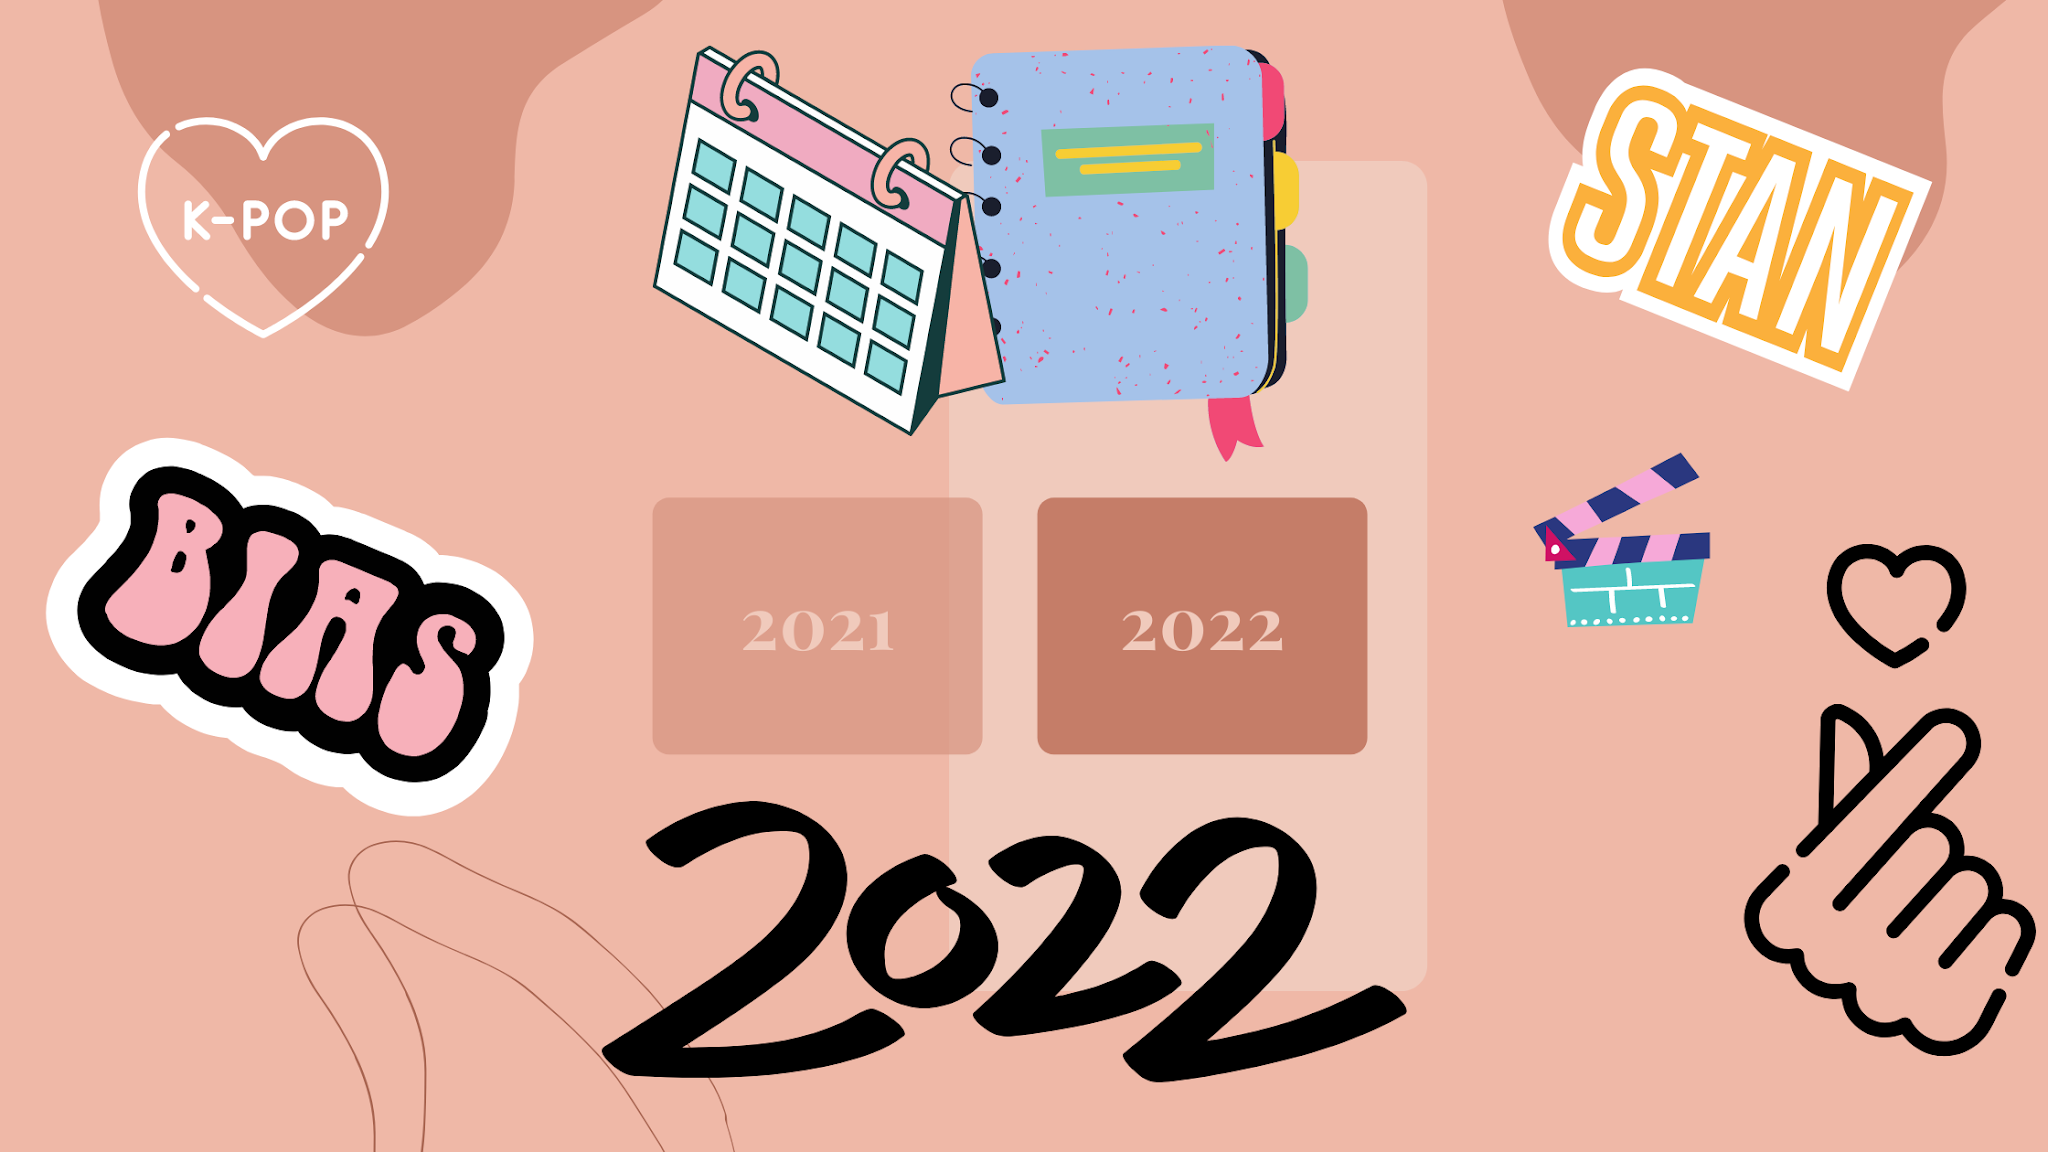 Kpop Schedule 2022 2022 K-Pop And K-Drama Calendars And Planners | Pinoyseoul.com